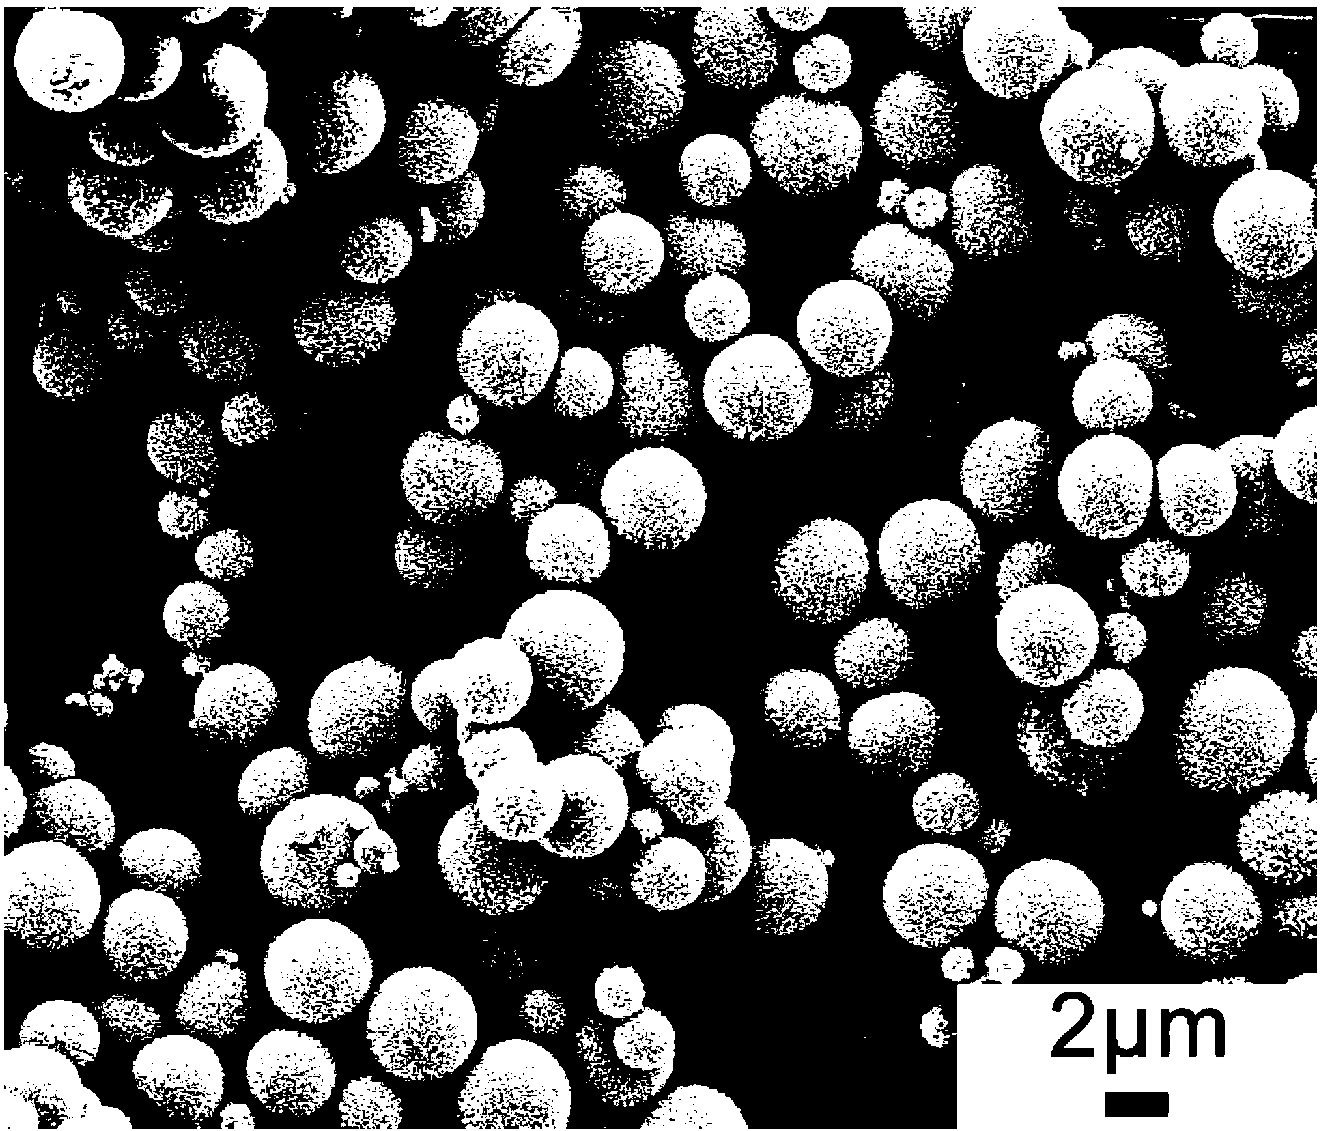 Preparation method of self-assembled silver ball SERS (Surface Enhanced Raman Scattering) base with controllable silver nano sheet thickness